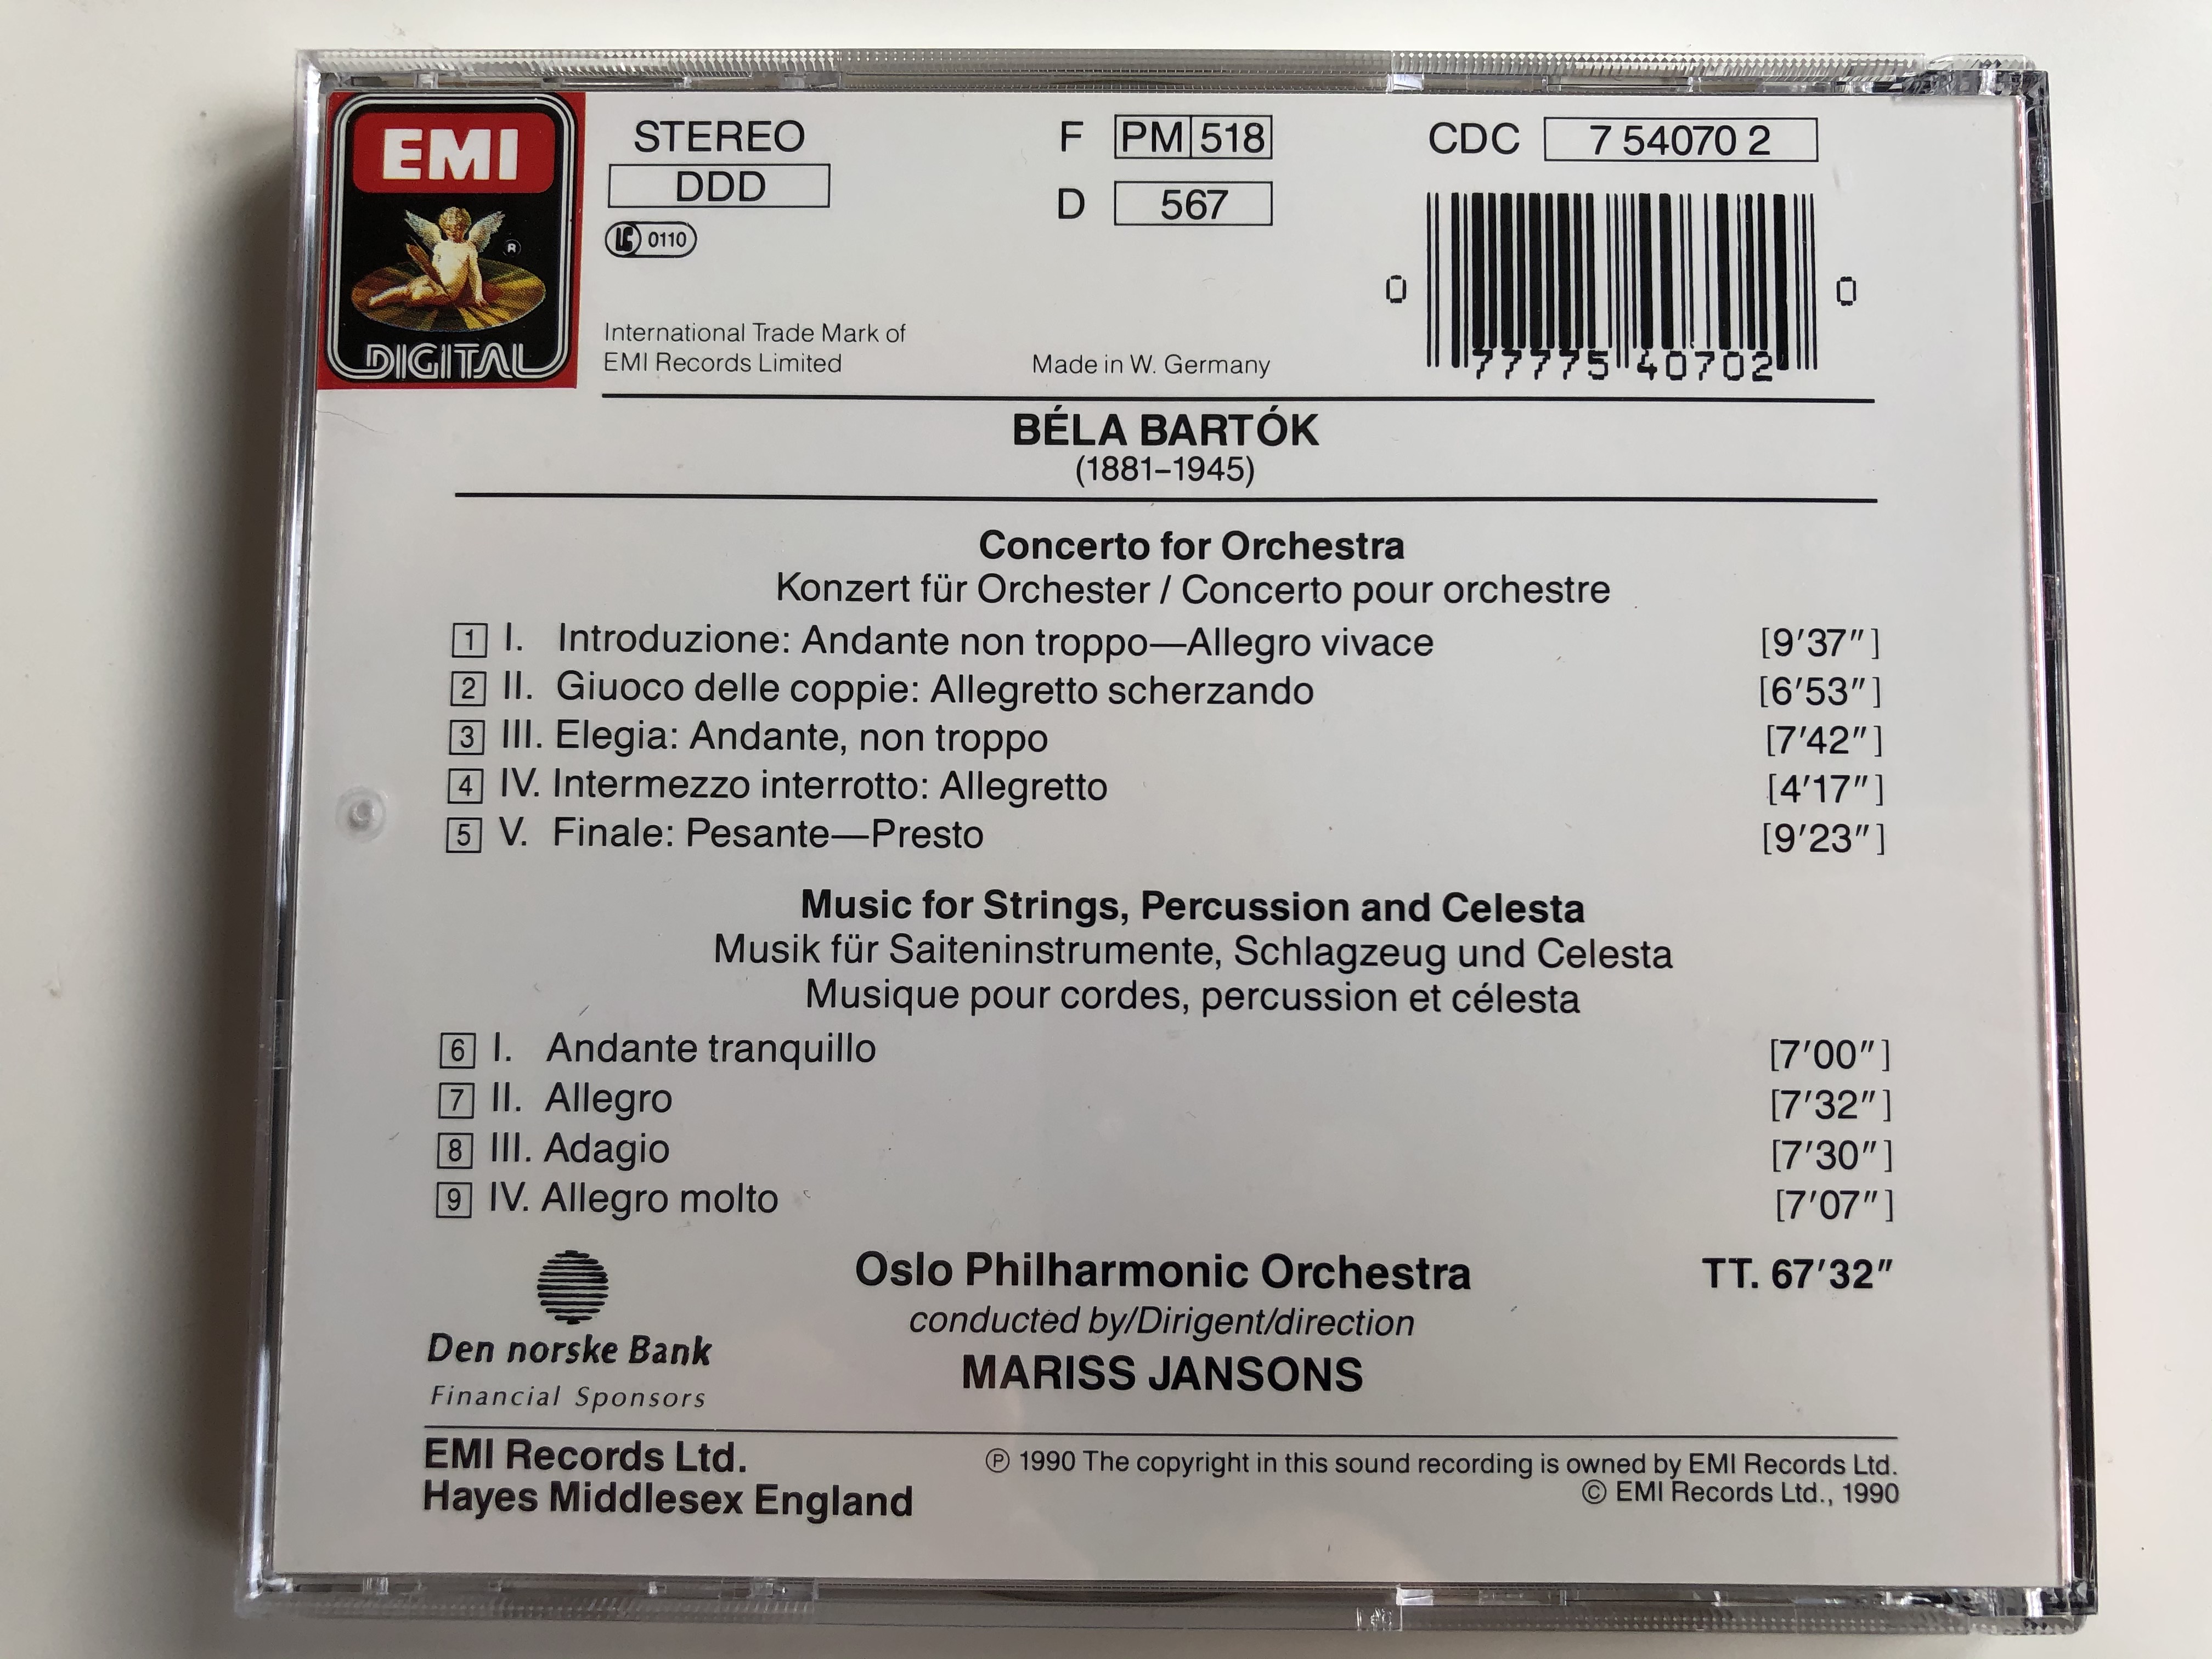 bart-k-concerto-for-orchestra-music-for-strings-percussion-and-celesta-oslo-philharmonic-orchestra-mariss-jansons-emi-digital-audio-cd-1990-stereo-cdc-7-54070-2-7-.jpg